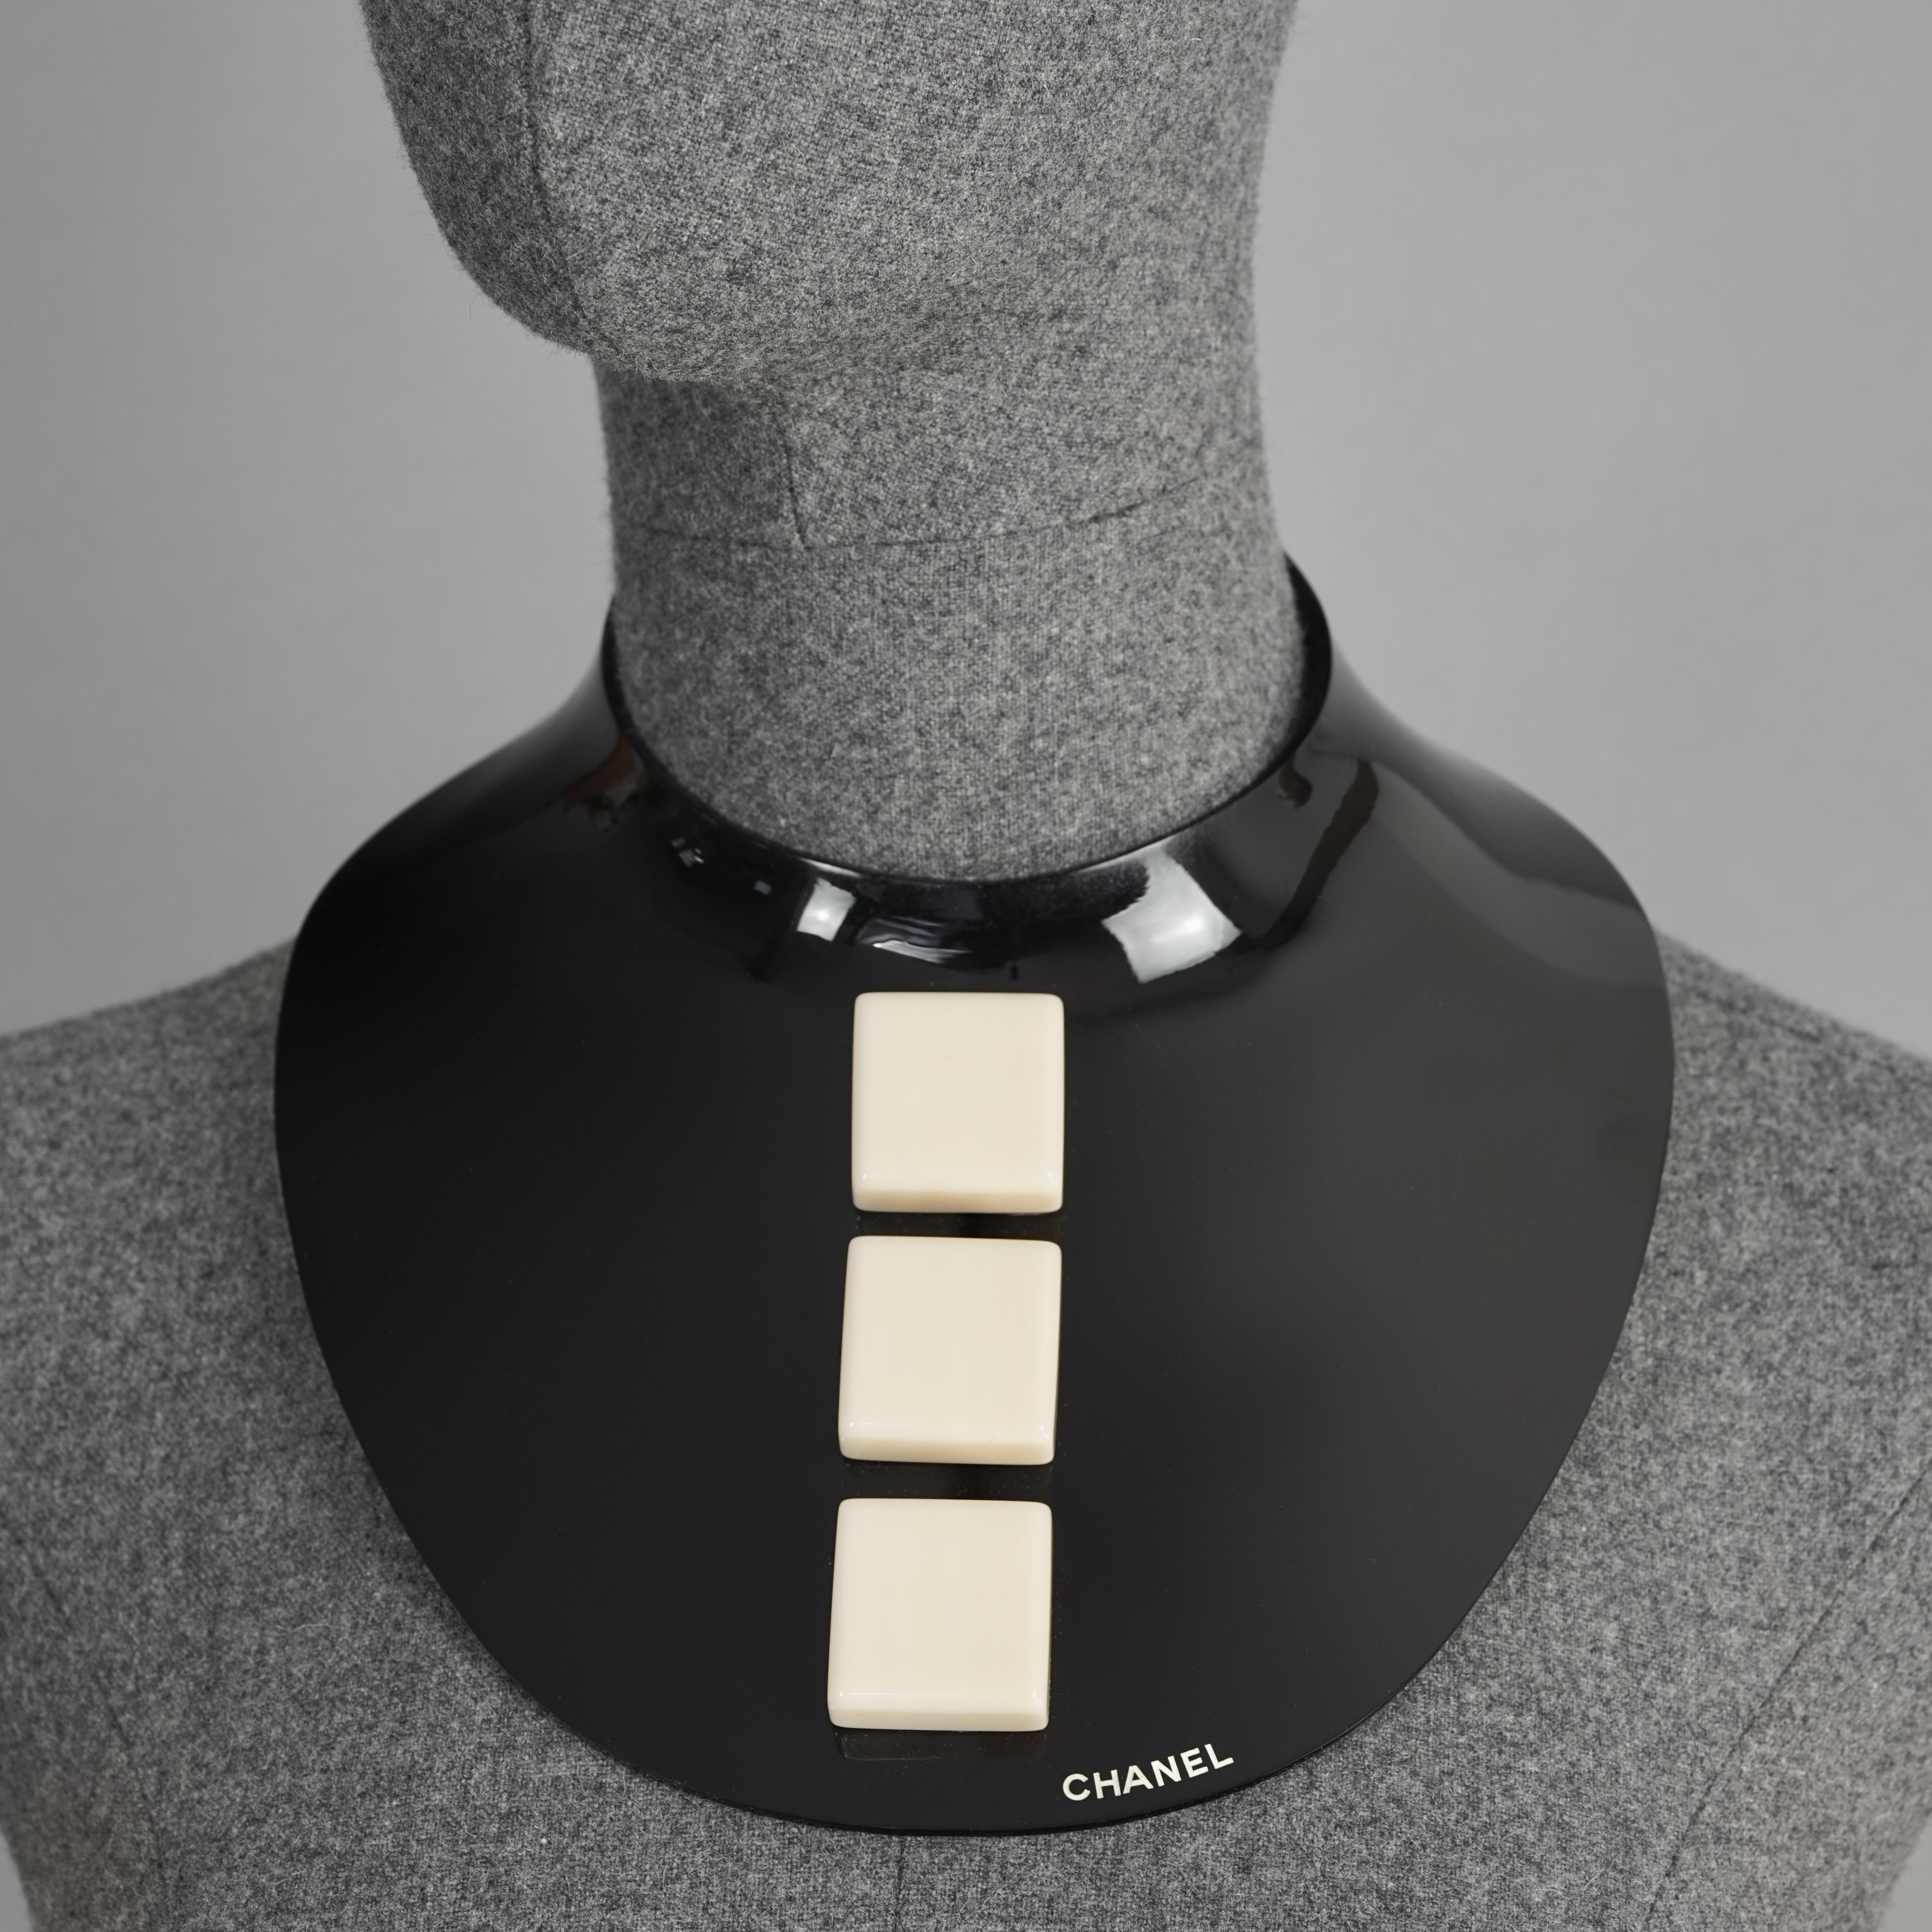 CHANEL FALL 2007 Black and White Resin Breastplate Choker Necklace

Measurements:
Height: 5.51 inches (14 cm)
Wearable Length: 12.67 inches (32.2cm)

Features:
- 100% Authentic CHANEL from 2007 Fall Collection.
- Black breastplate/ plastron in resin